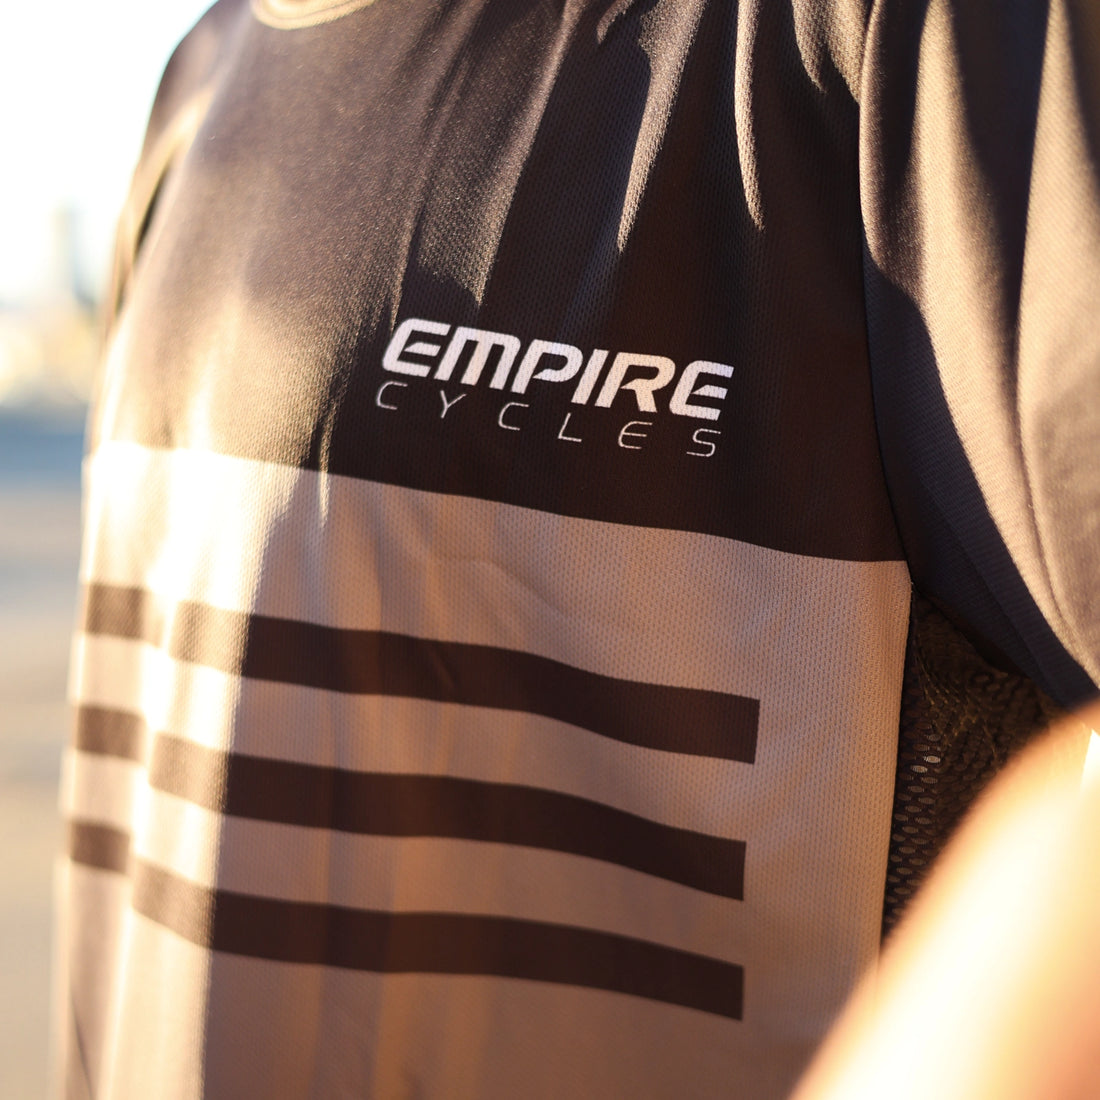 Empire Cycles x Fastcoast Short Sleeve Trail Jersey